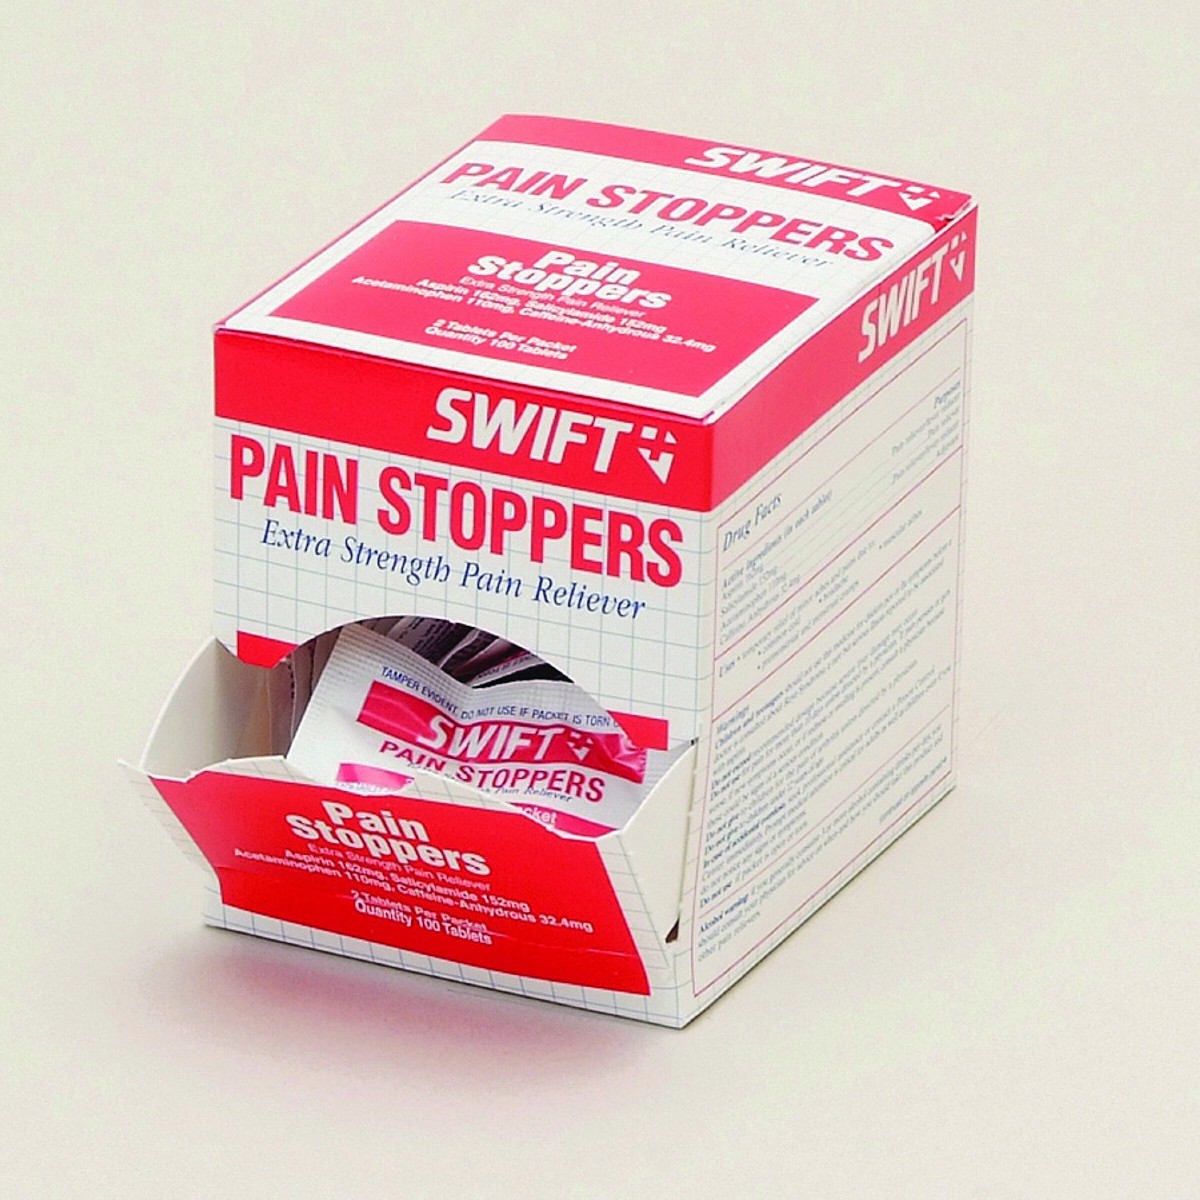 Honeywell Pain Stoppers Pain Relief Tablets (2 Per Pack, 50 Packs Per Box)